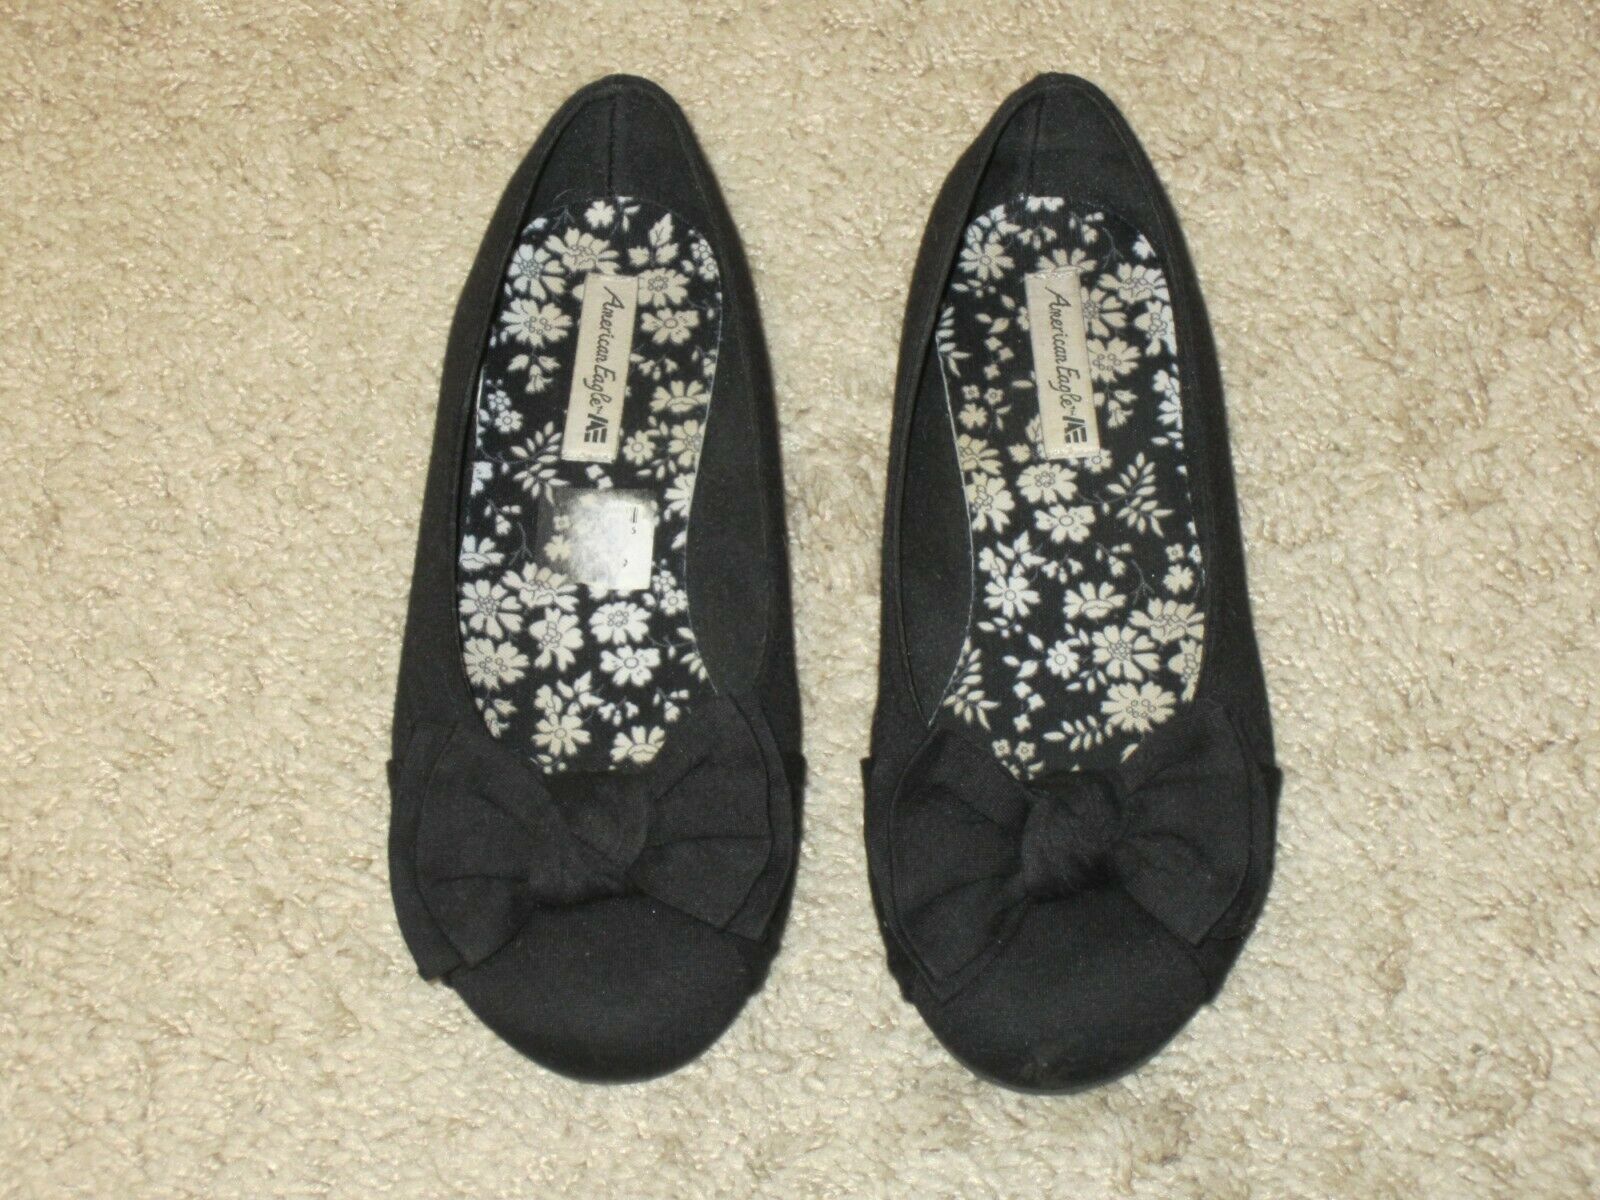 Girls American Eagle Shoes - Black Slip-On Shoes with Bow, Size 2, Gently Used